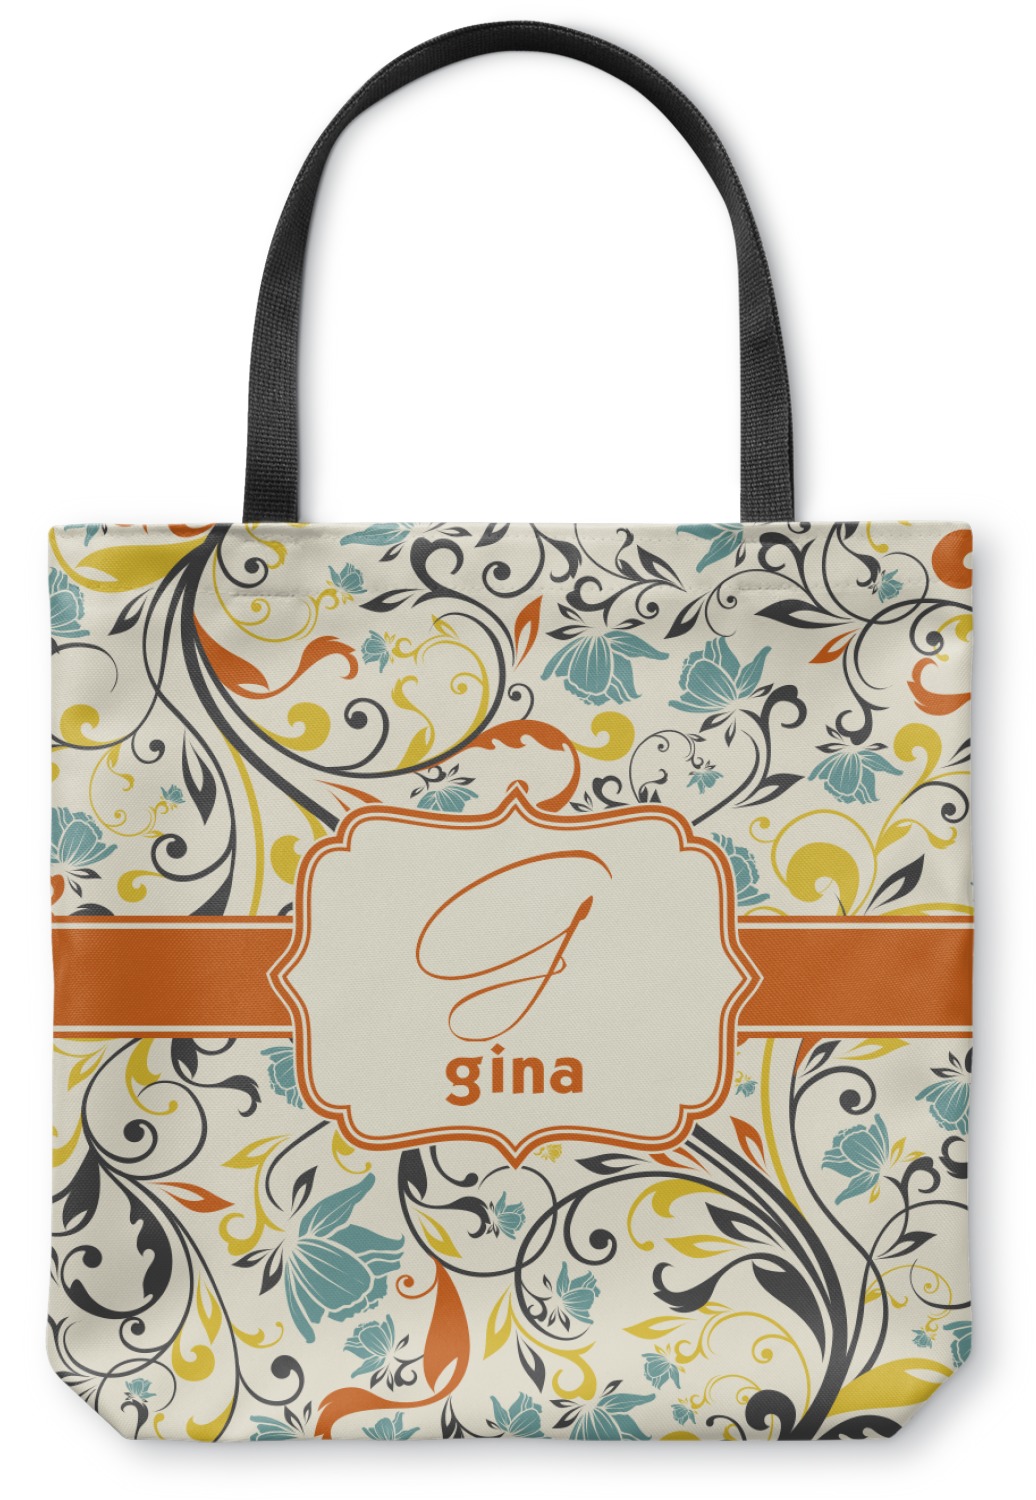 Swirly Floral Canvas Tote Bag (Personalized) - YouCustomizeIt